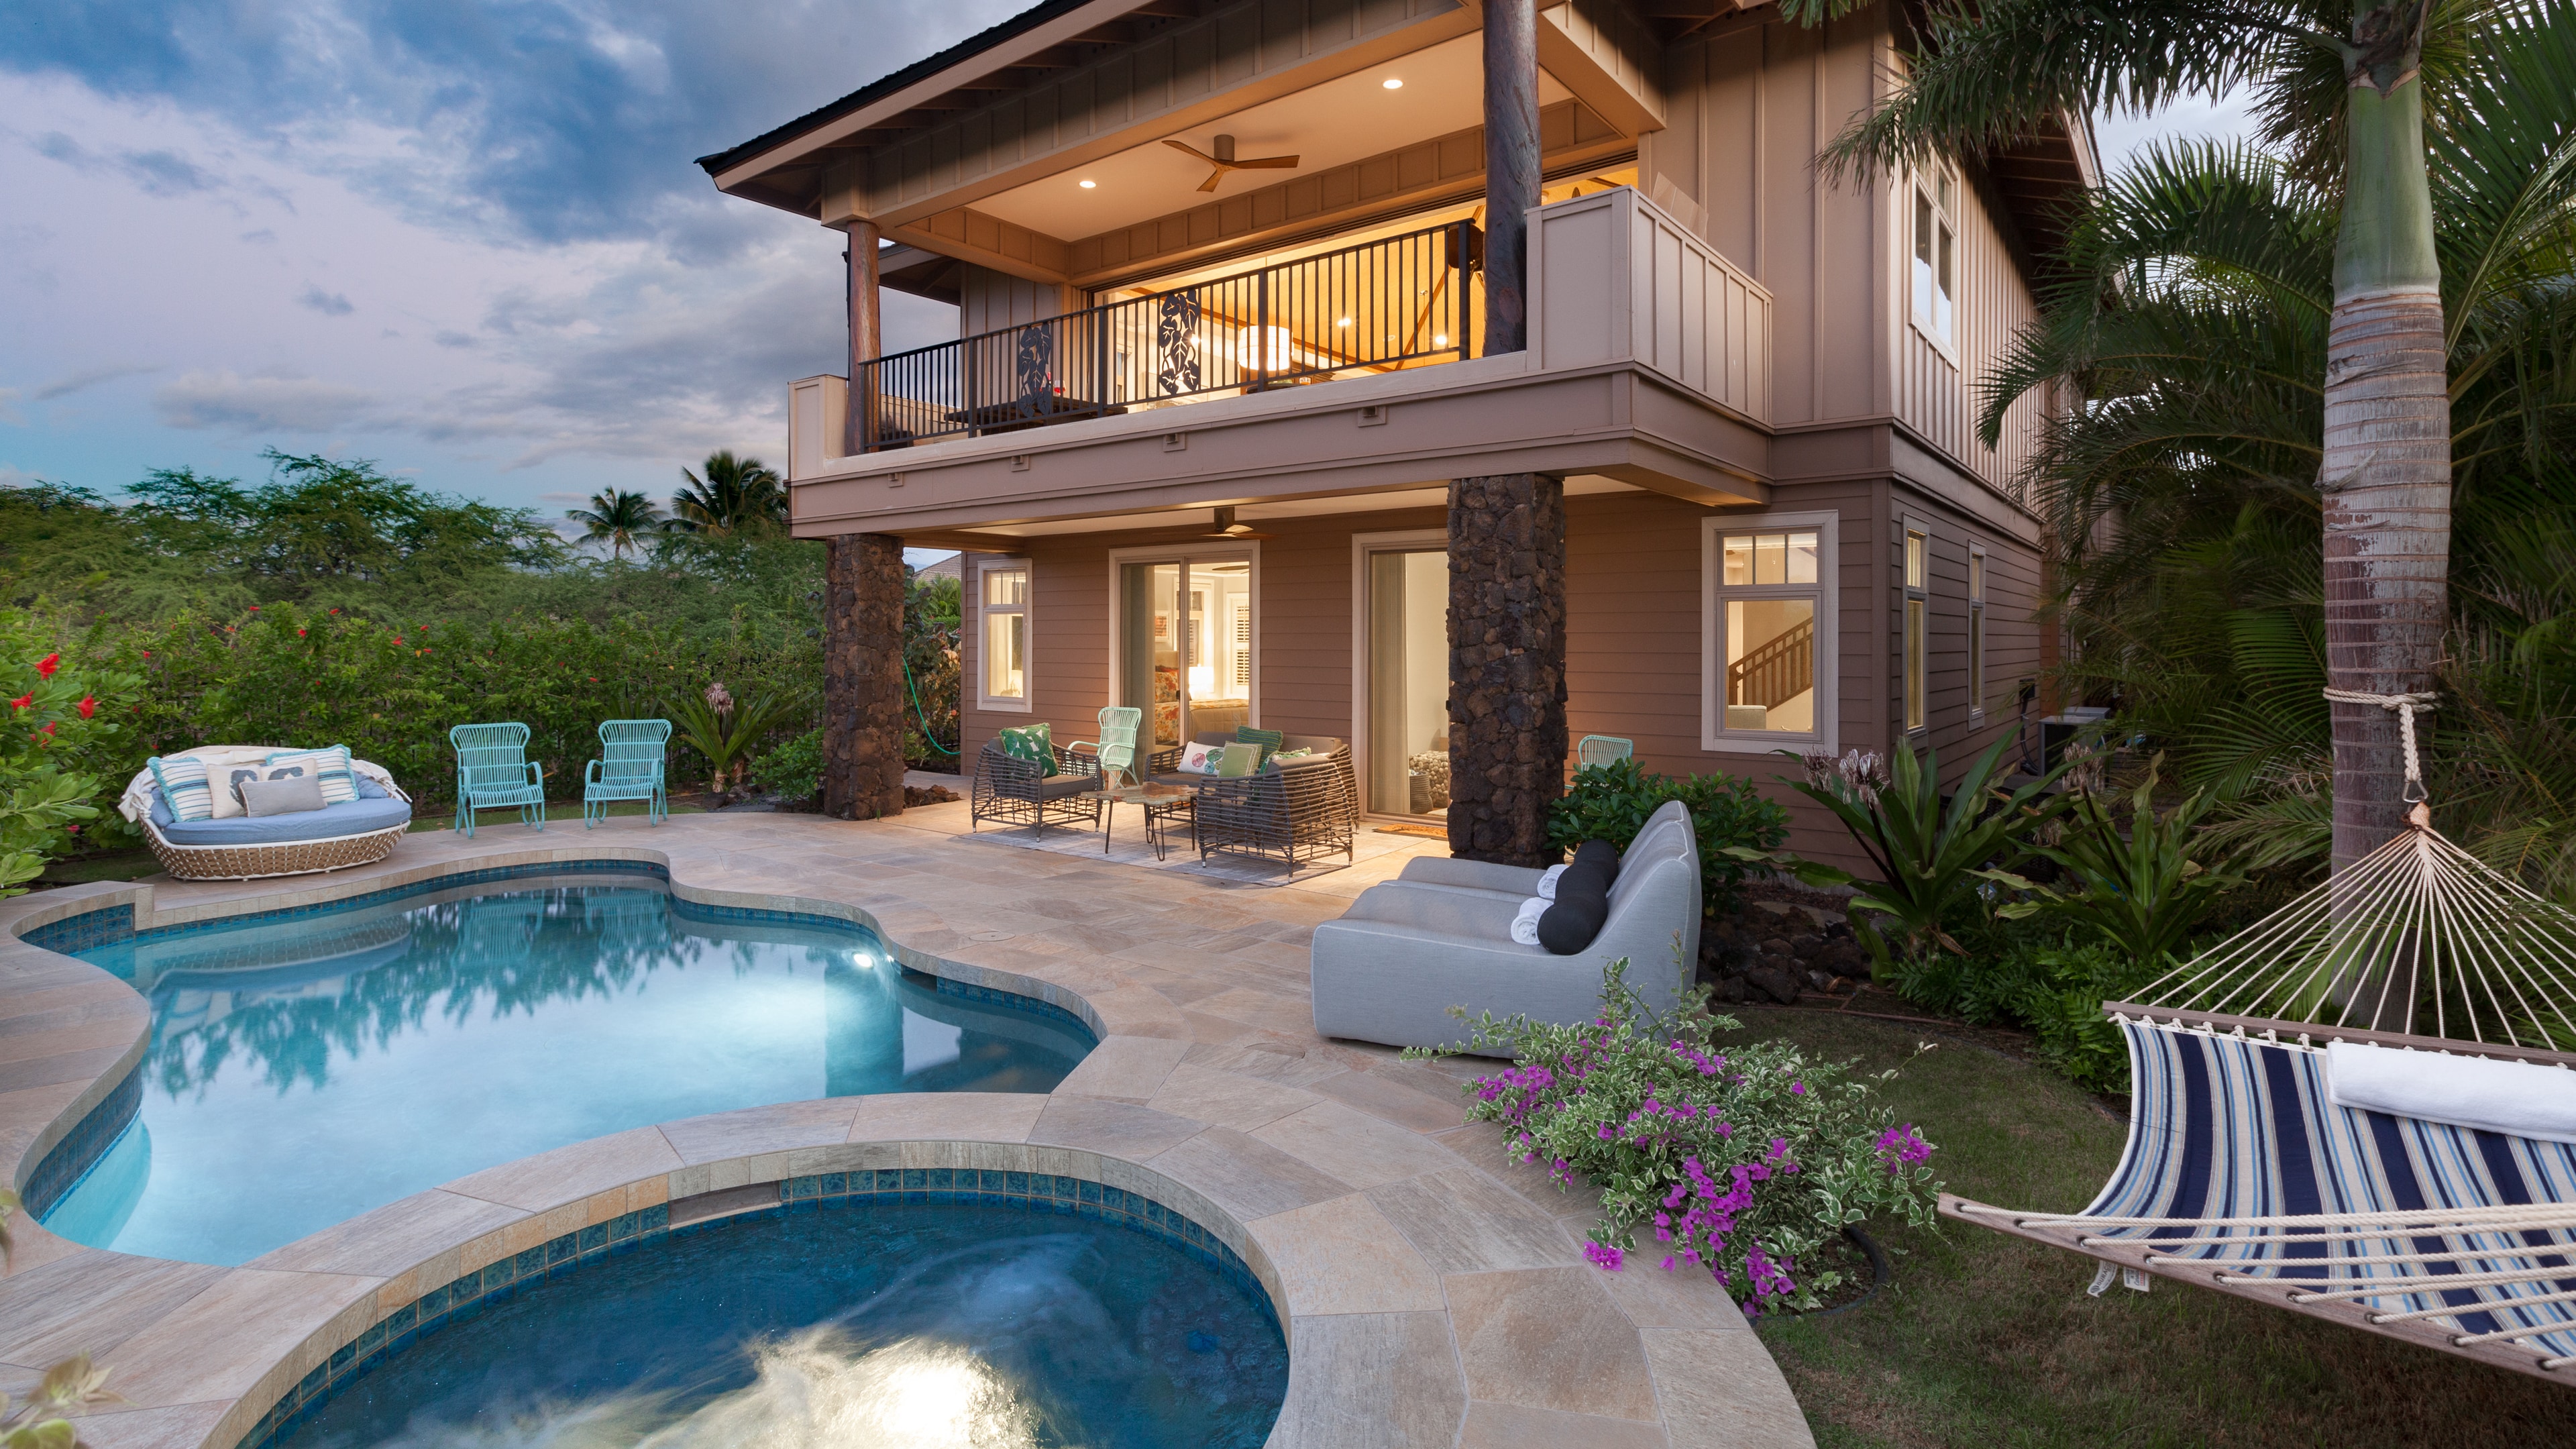 Welcome to Sea Glass House!
Luxury KaMilo home with best views, private heated pool and spa